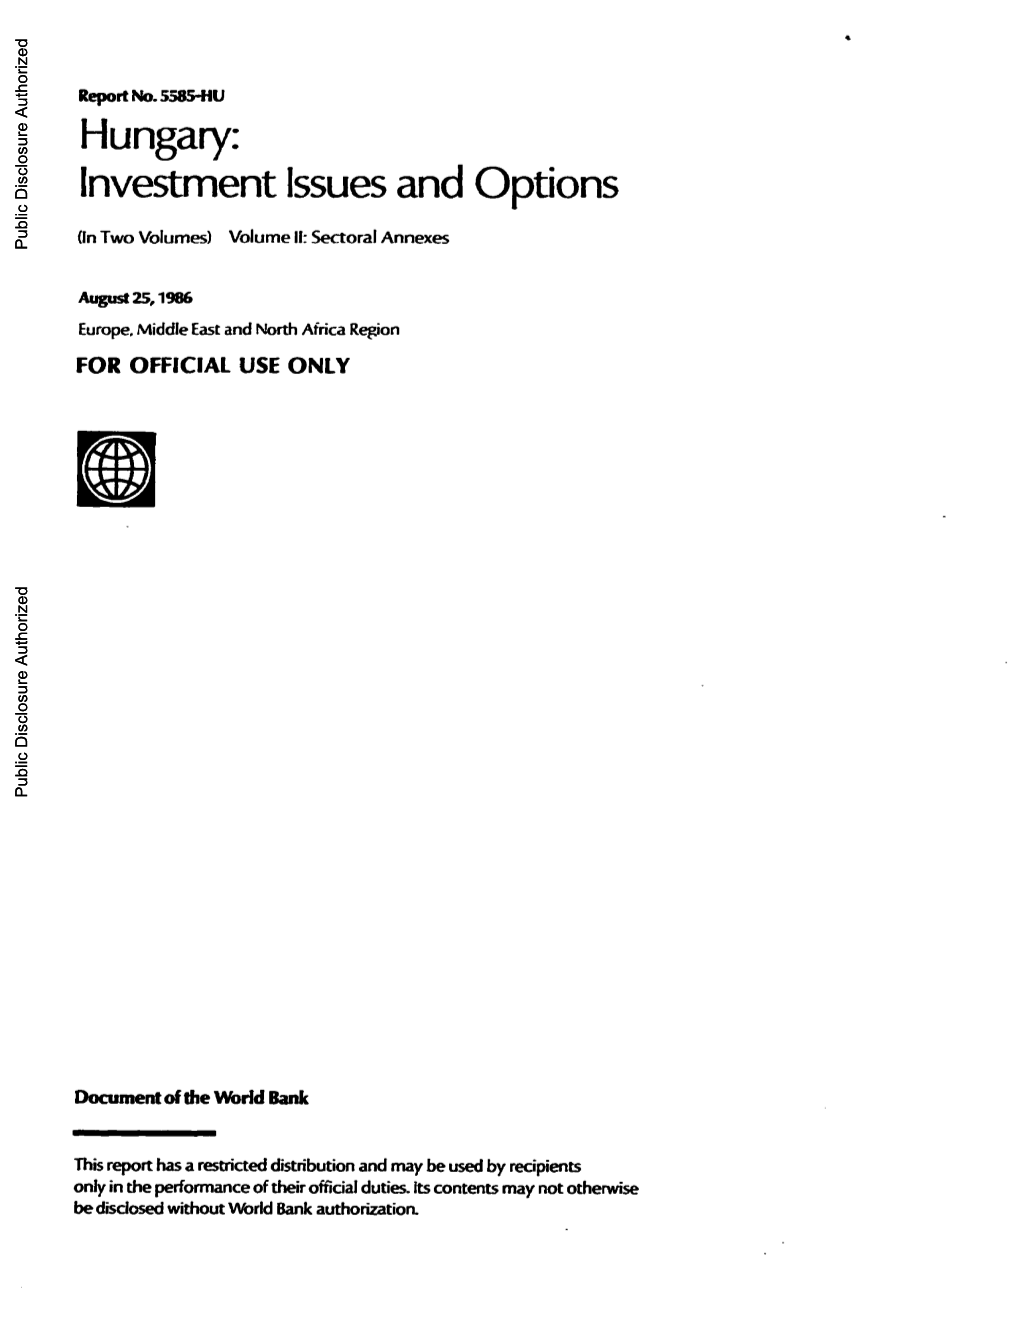 Hungary: Investment Issues and Options